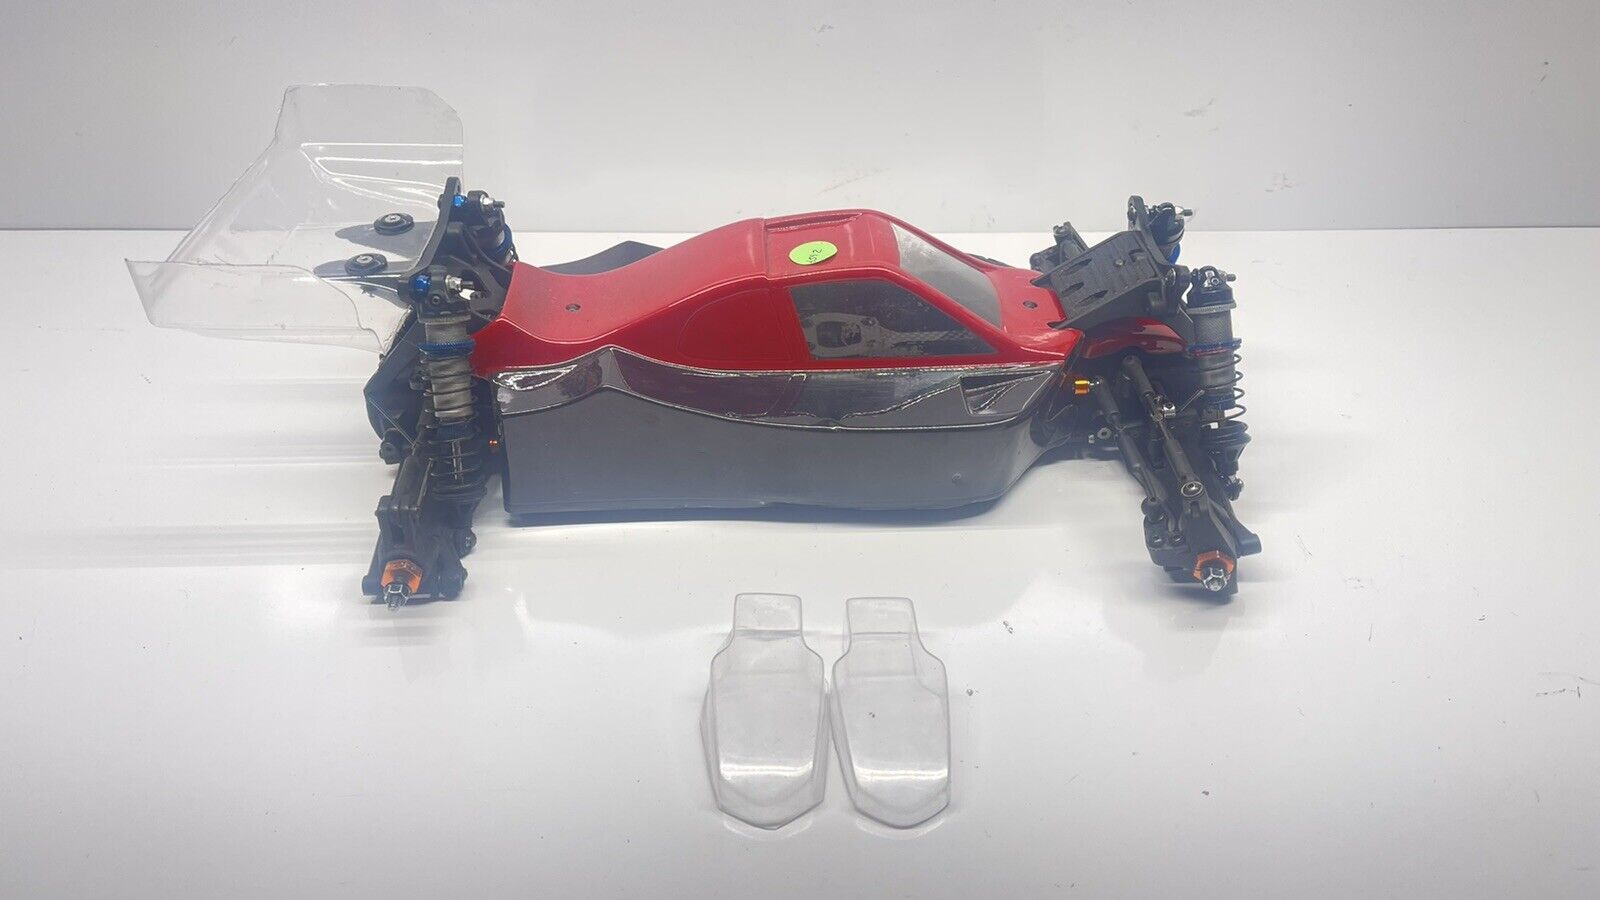 Hot Bodies D413 Slider/Roller W Carbon Chassis & Body Rc Part #6592